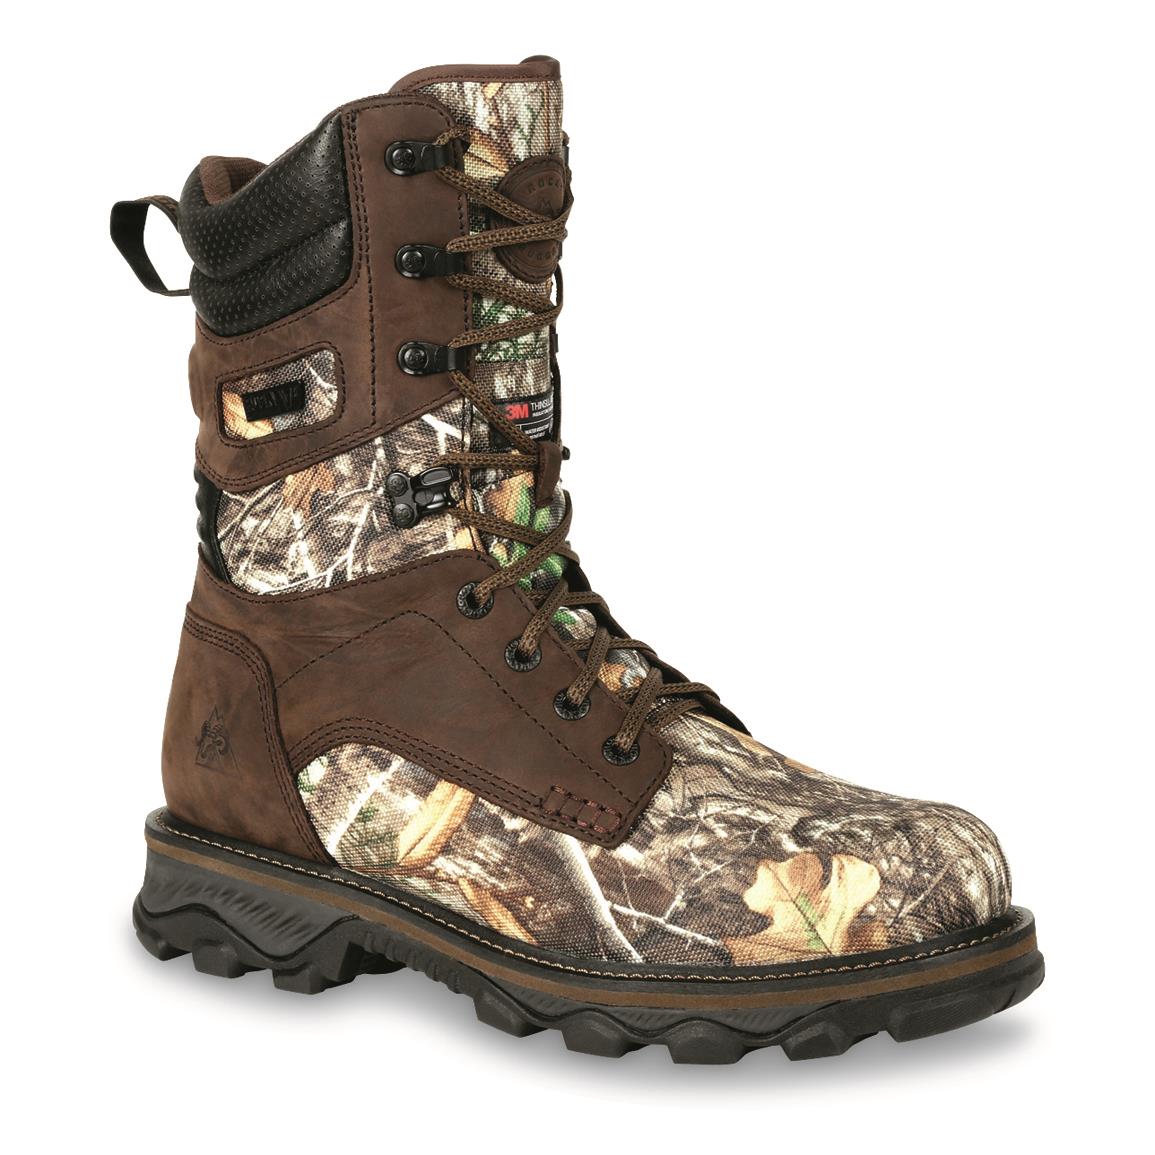 rocky men's hunting boots